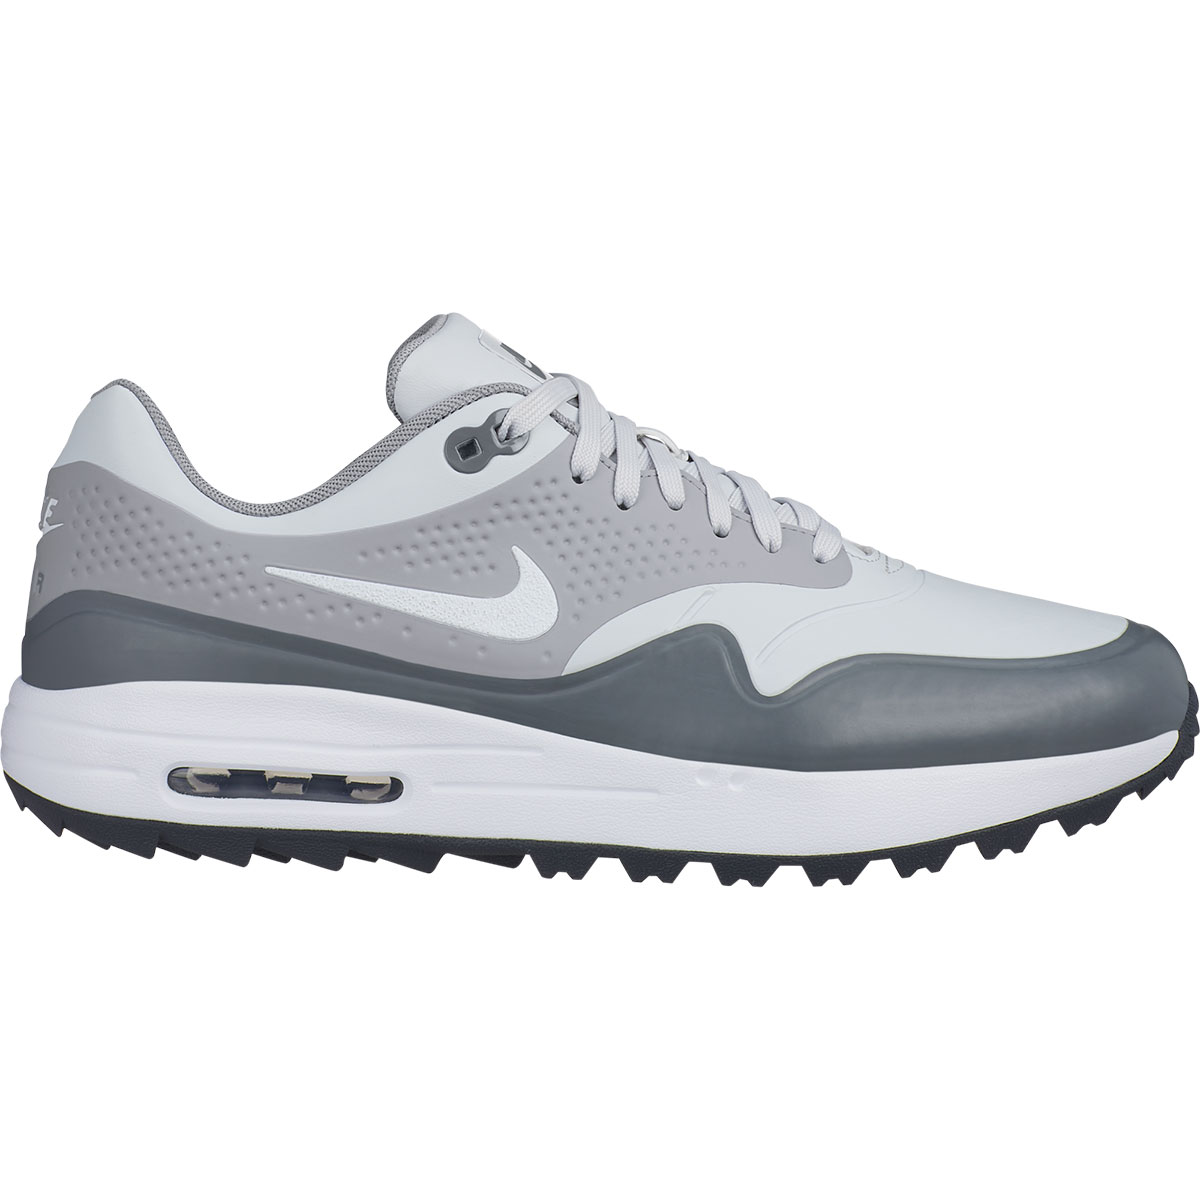 nike air max 1 g spikeless golf shoes 2019